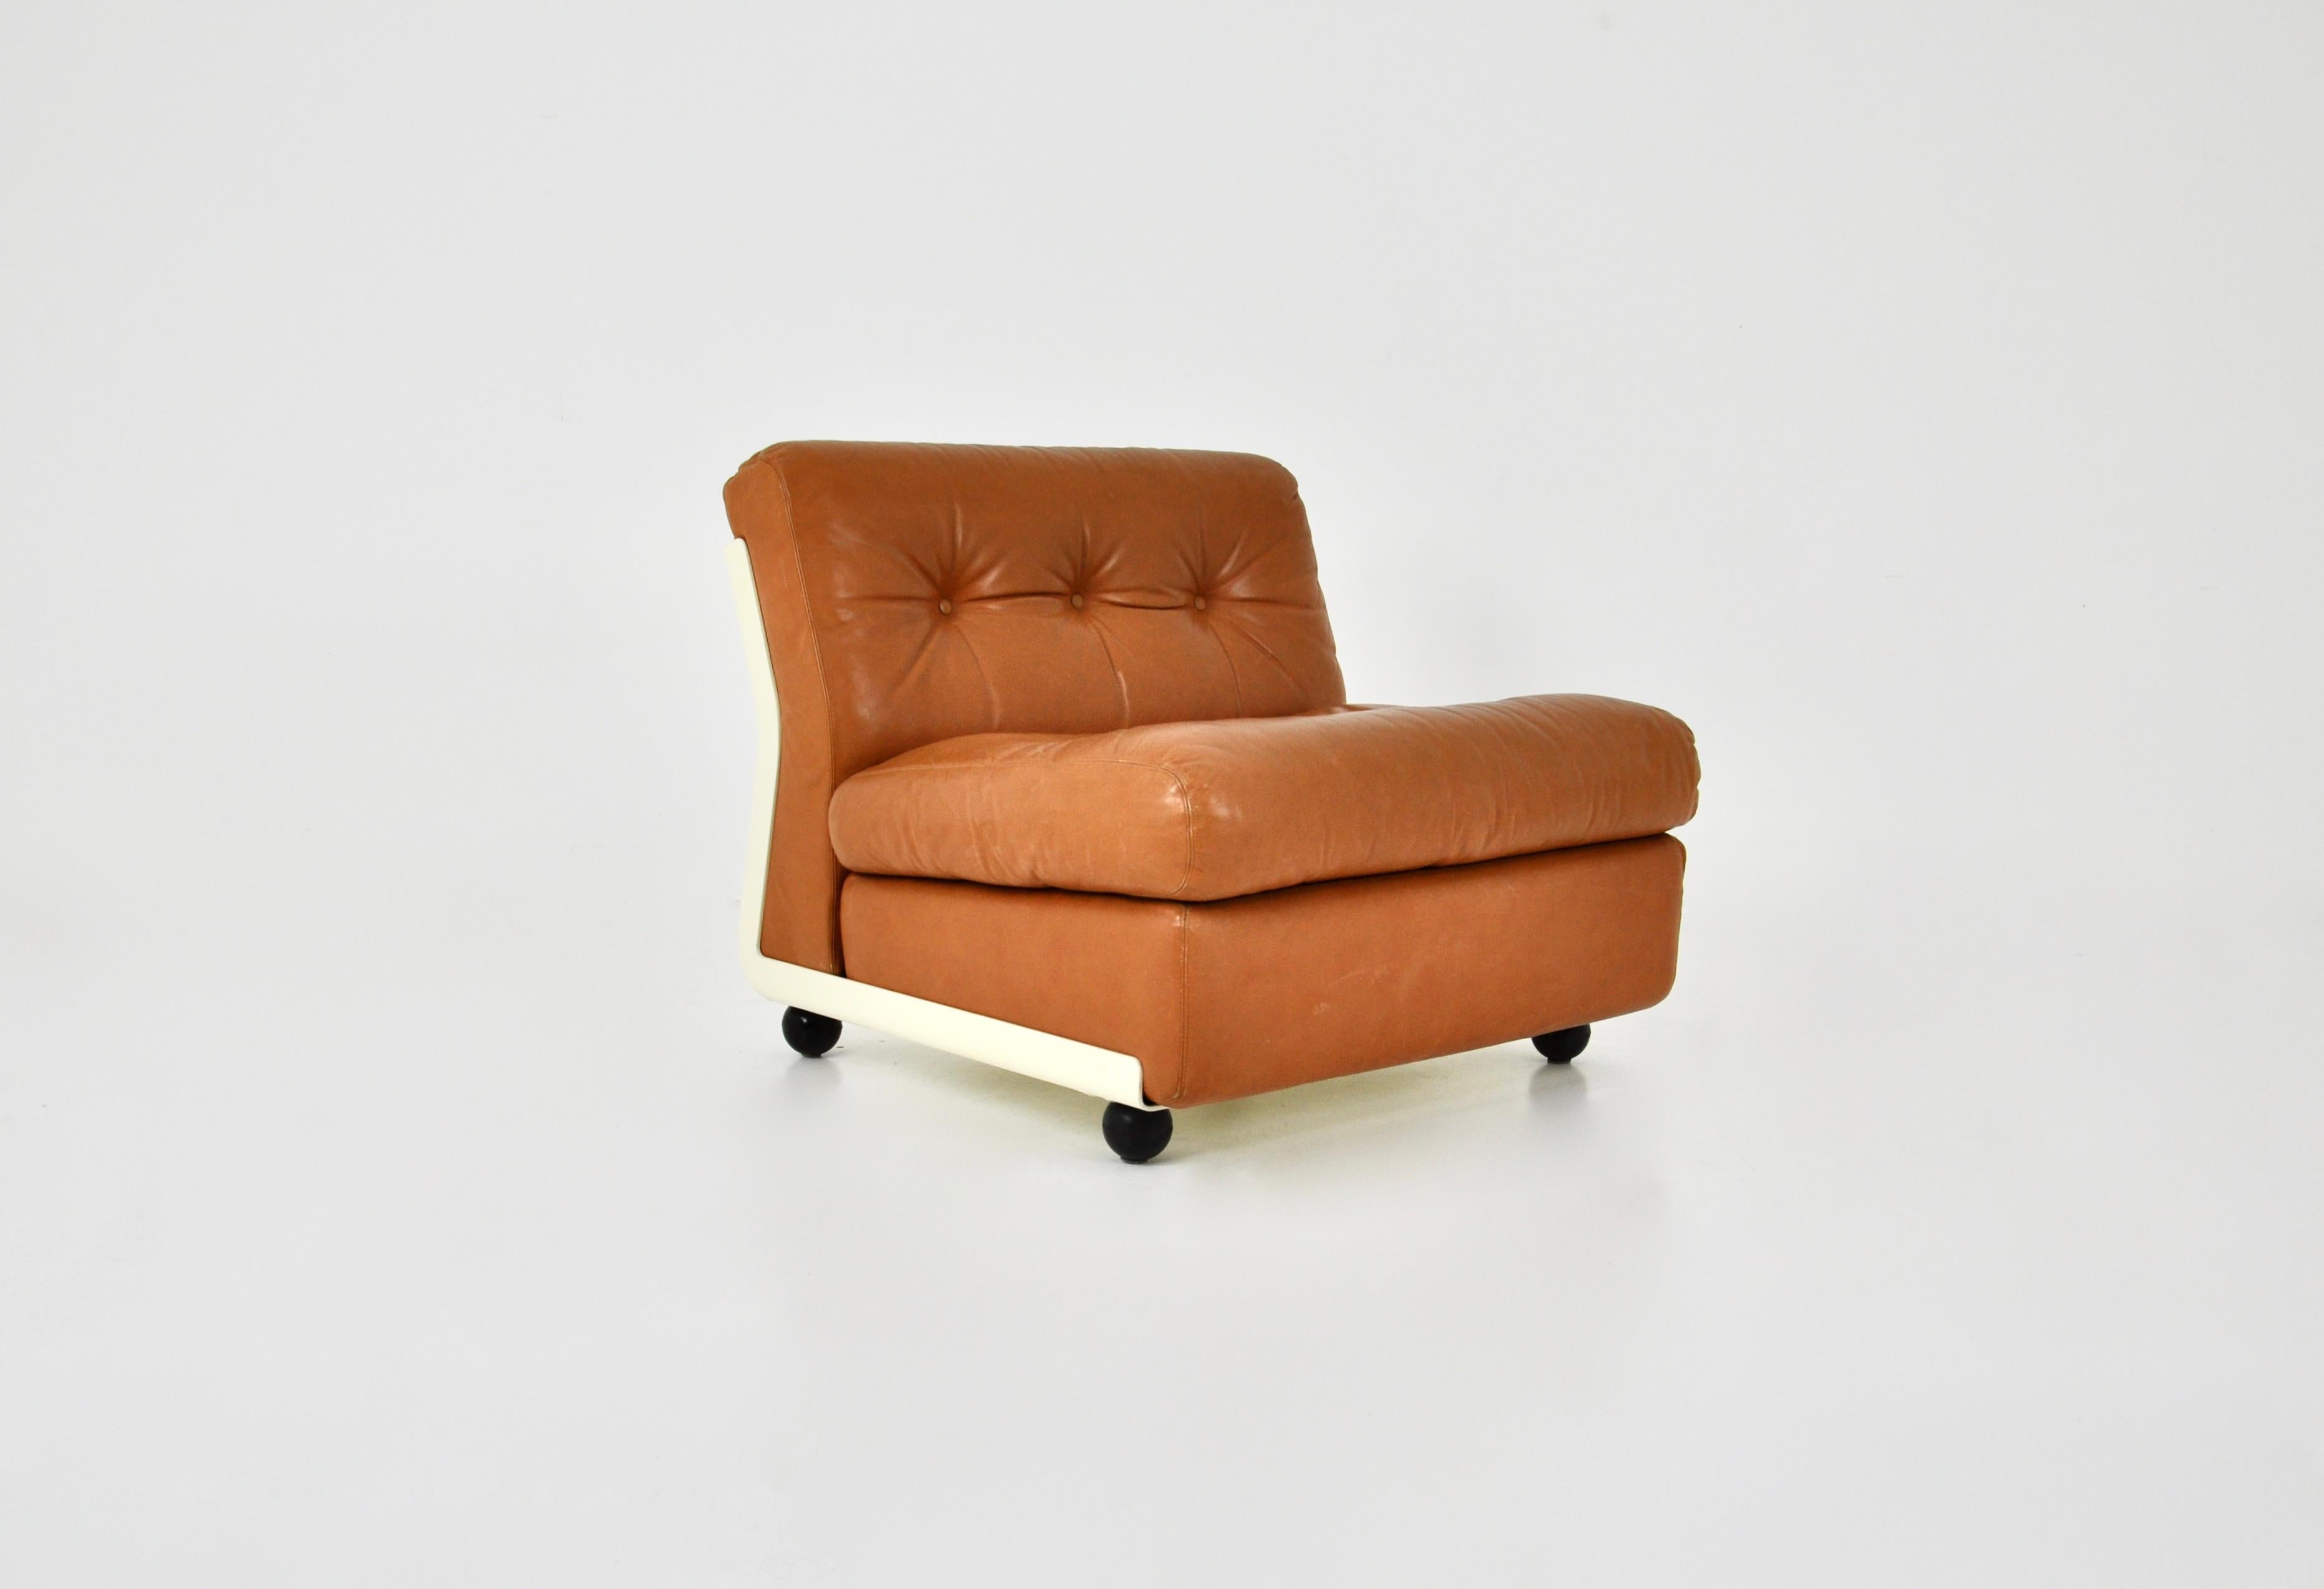 Armchair with cognac-coloured leather and white fibreglass shell. Designed by Mario Bellini for B&B Italia. Seat height: 43 cm. Stamped B&B Italia. Wear due to time and age.
